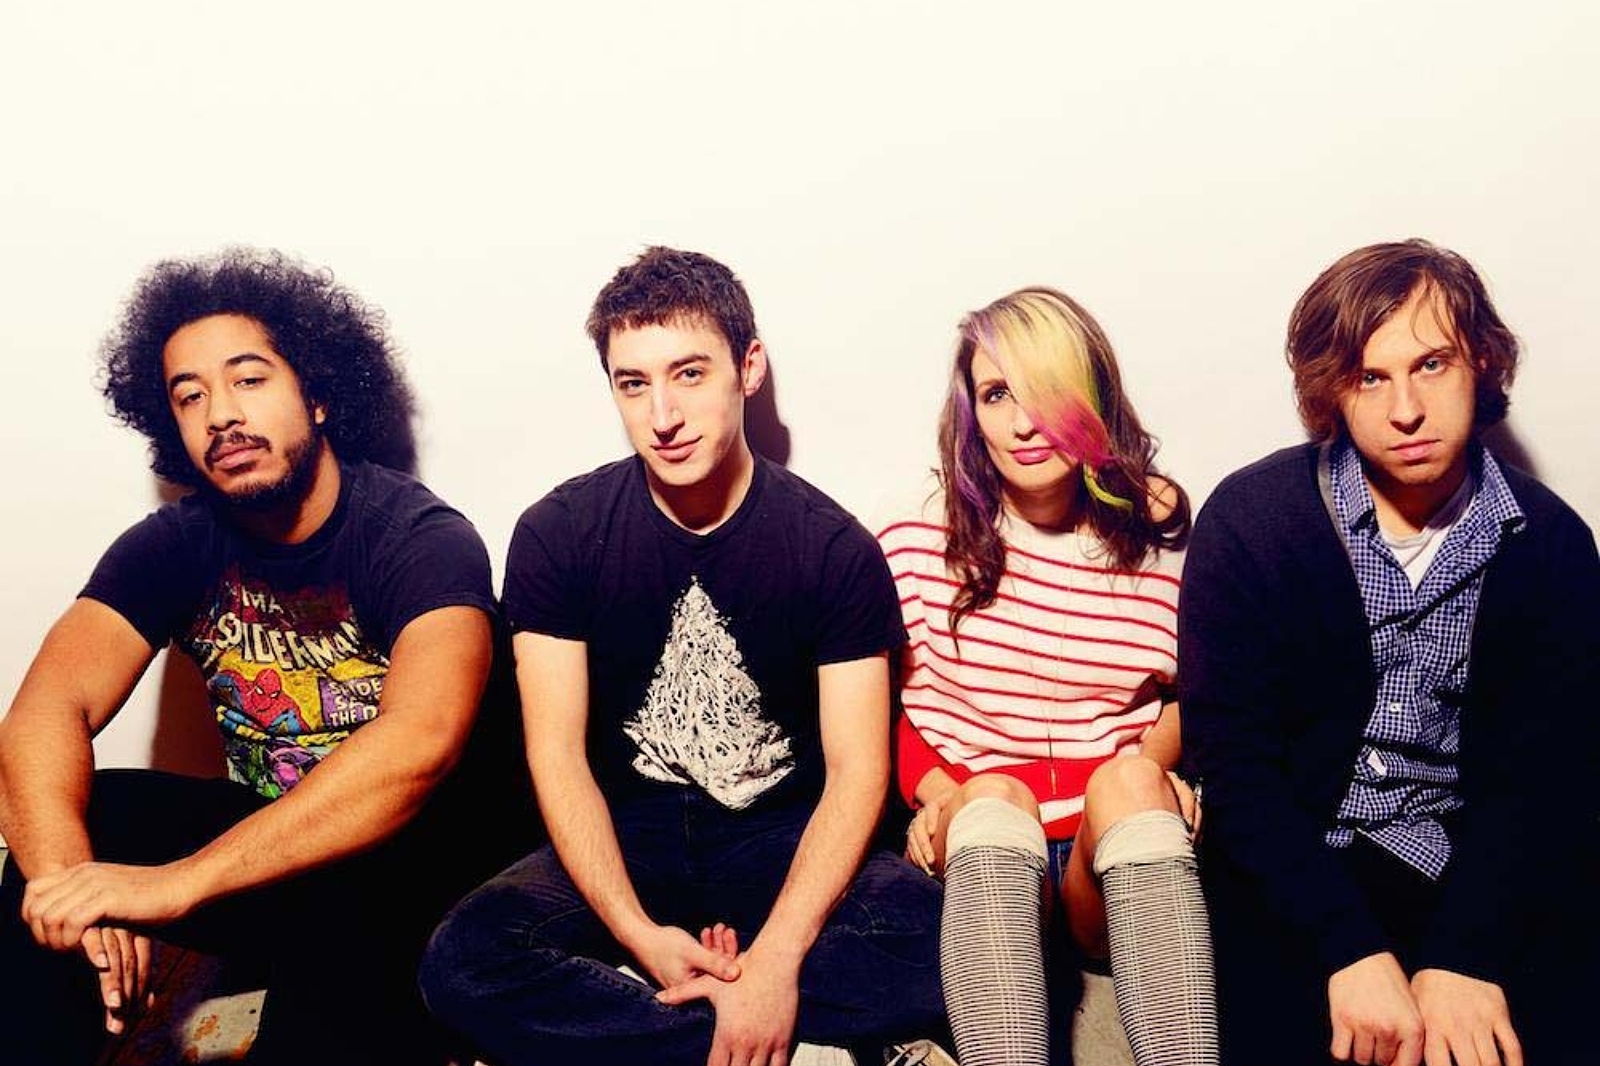 Speedy Ortiz talk favourite records, Festivus, and the perils of working with muppets after a manic 2015